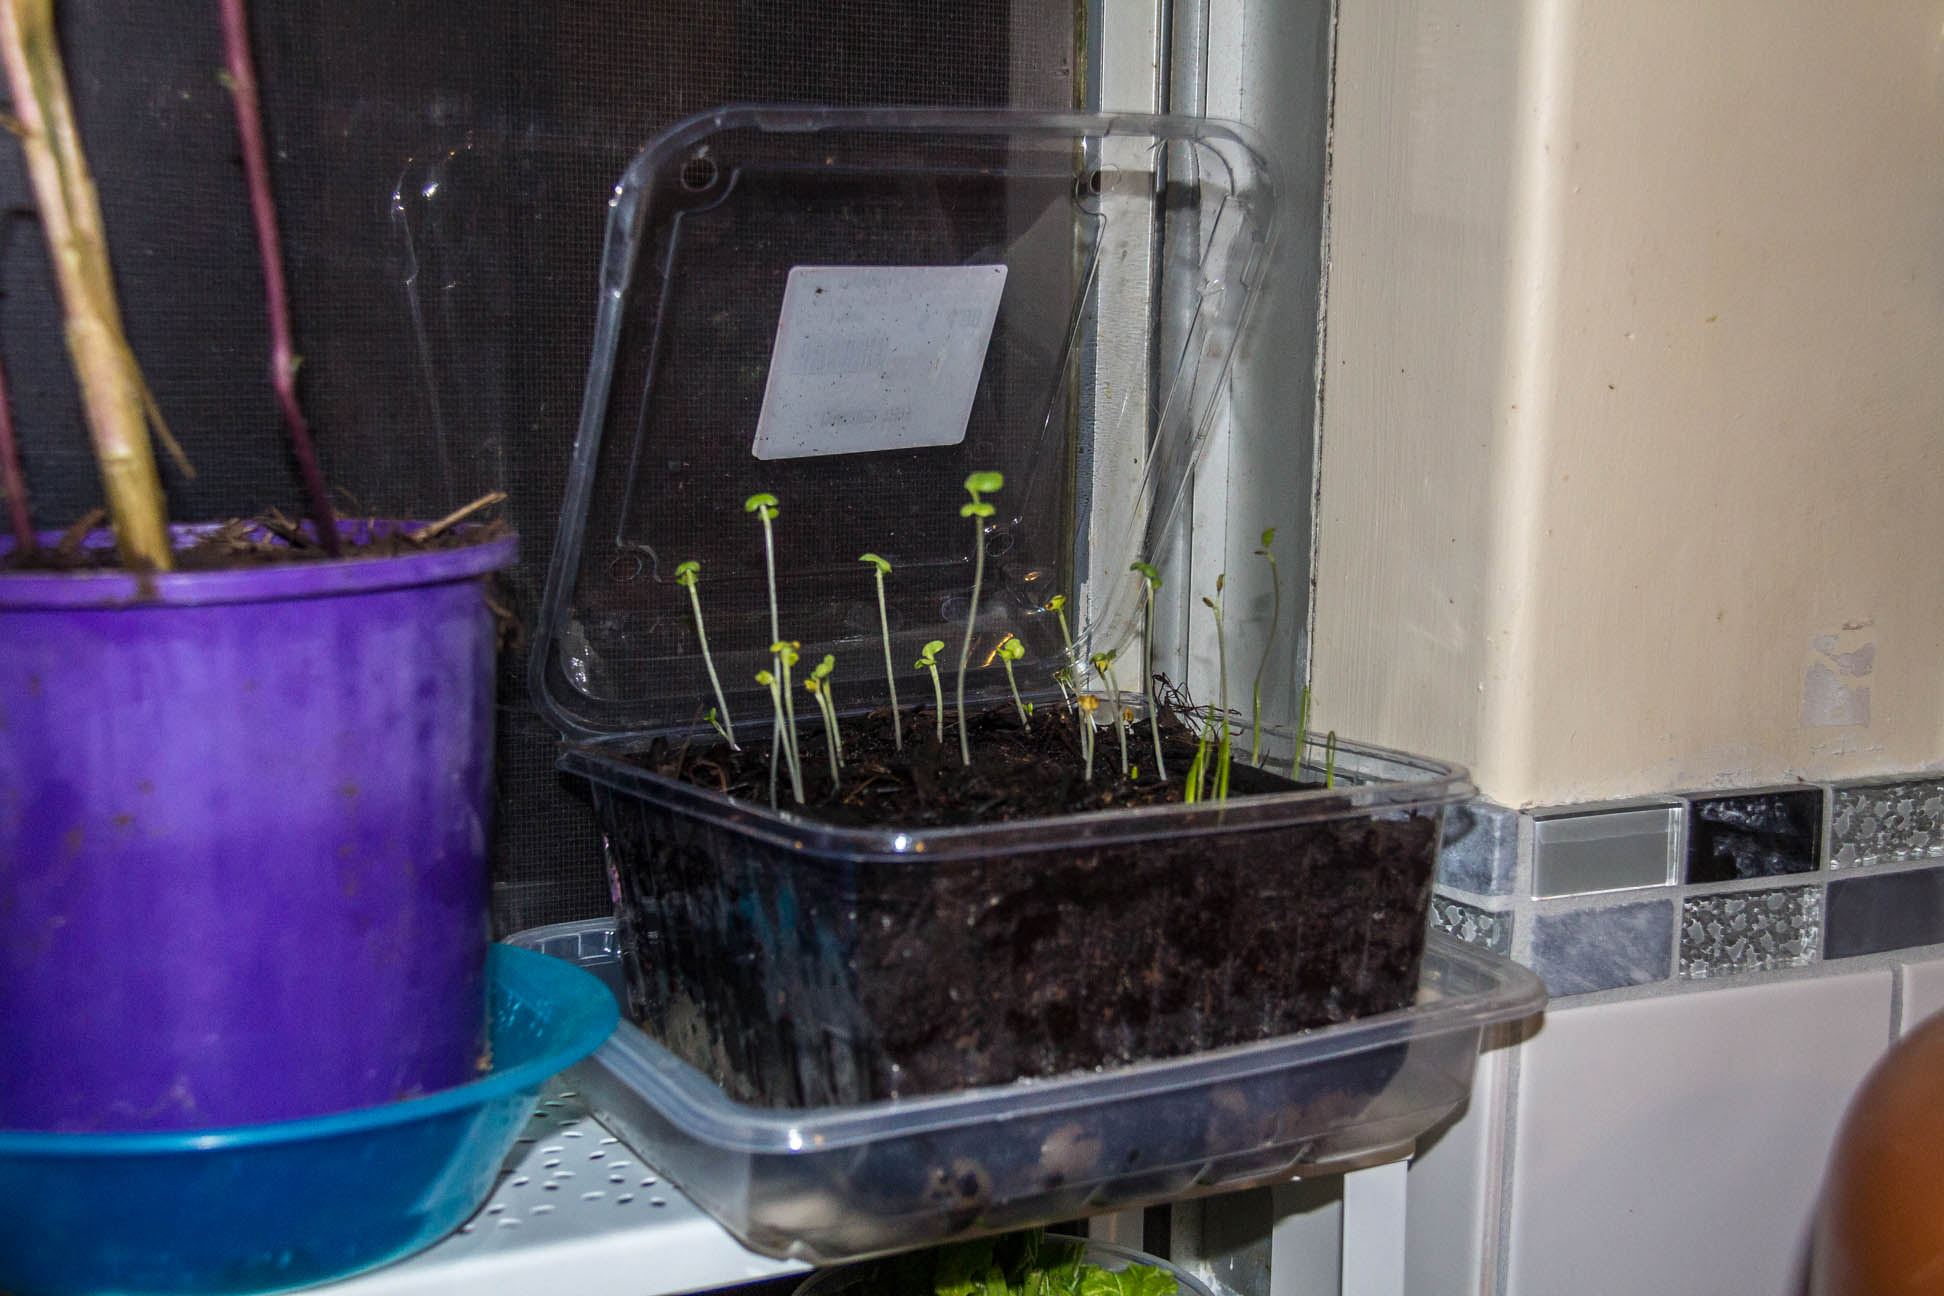 04/05/15 Day 11 The seedlings are going well. and more are sprouting :)